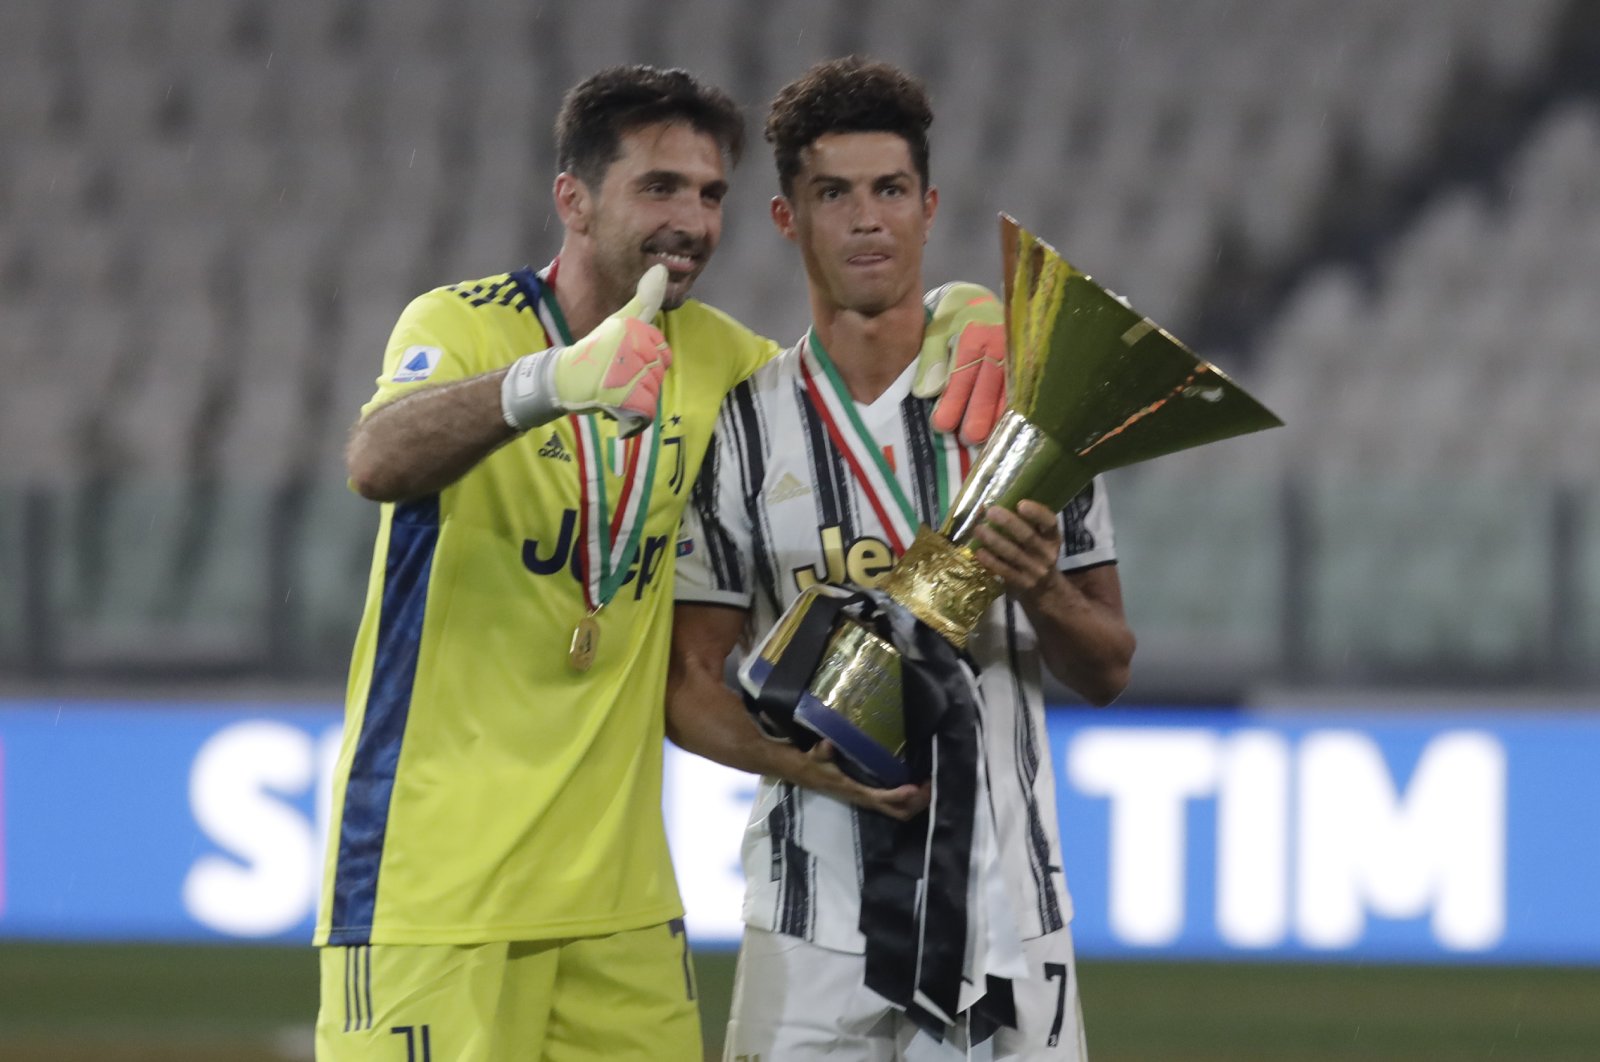 Juventus' Cristiano Ronaldo, right, and Juventus' goalkeeper Gianluigi Buffon hold the trophy as Juventus players celebrate winning an unprecedented ninth consecutive Italian Serie A soccer title, at the end of the a Serie A soccer match between Juventus and Roma, at the Allianz stadium in Turin, Italy, Saturday, Aug.1, 2020. (AP Photo/Luca Bruno)